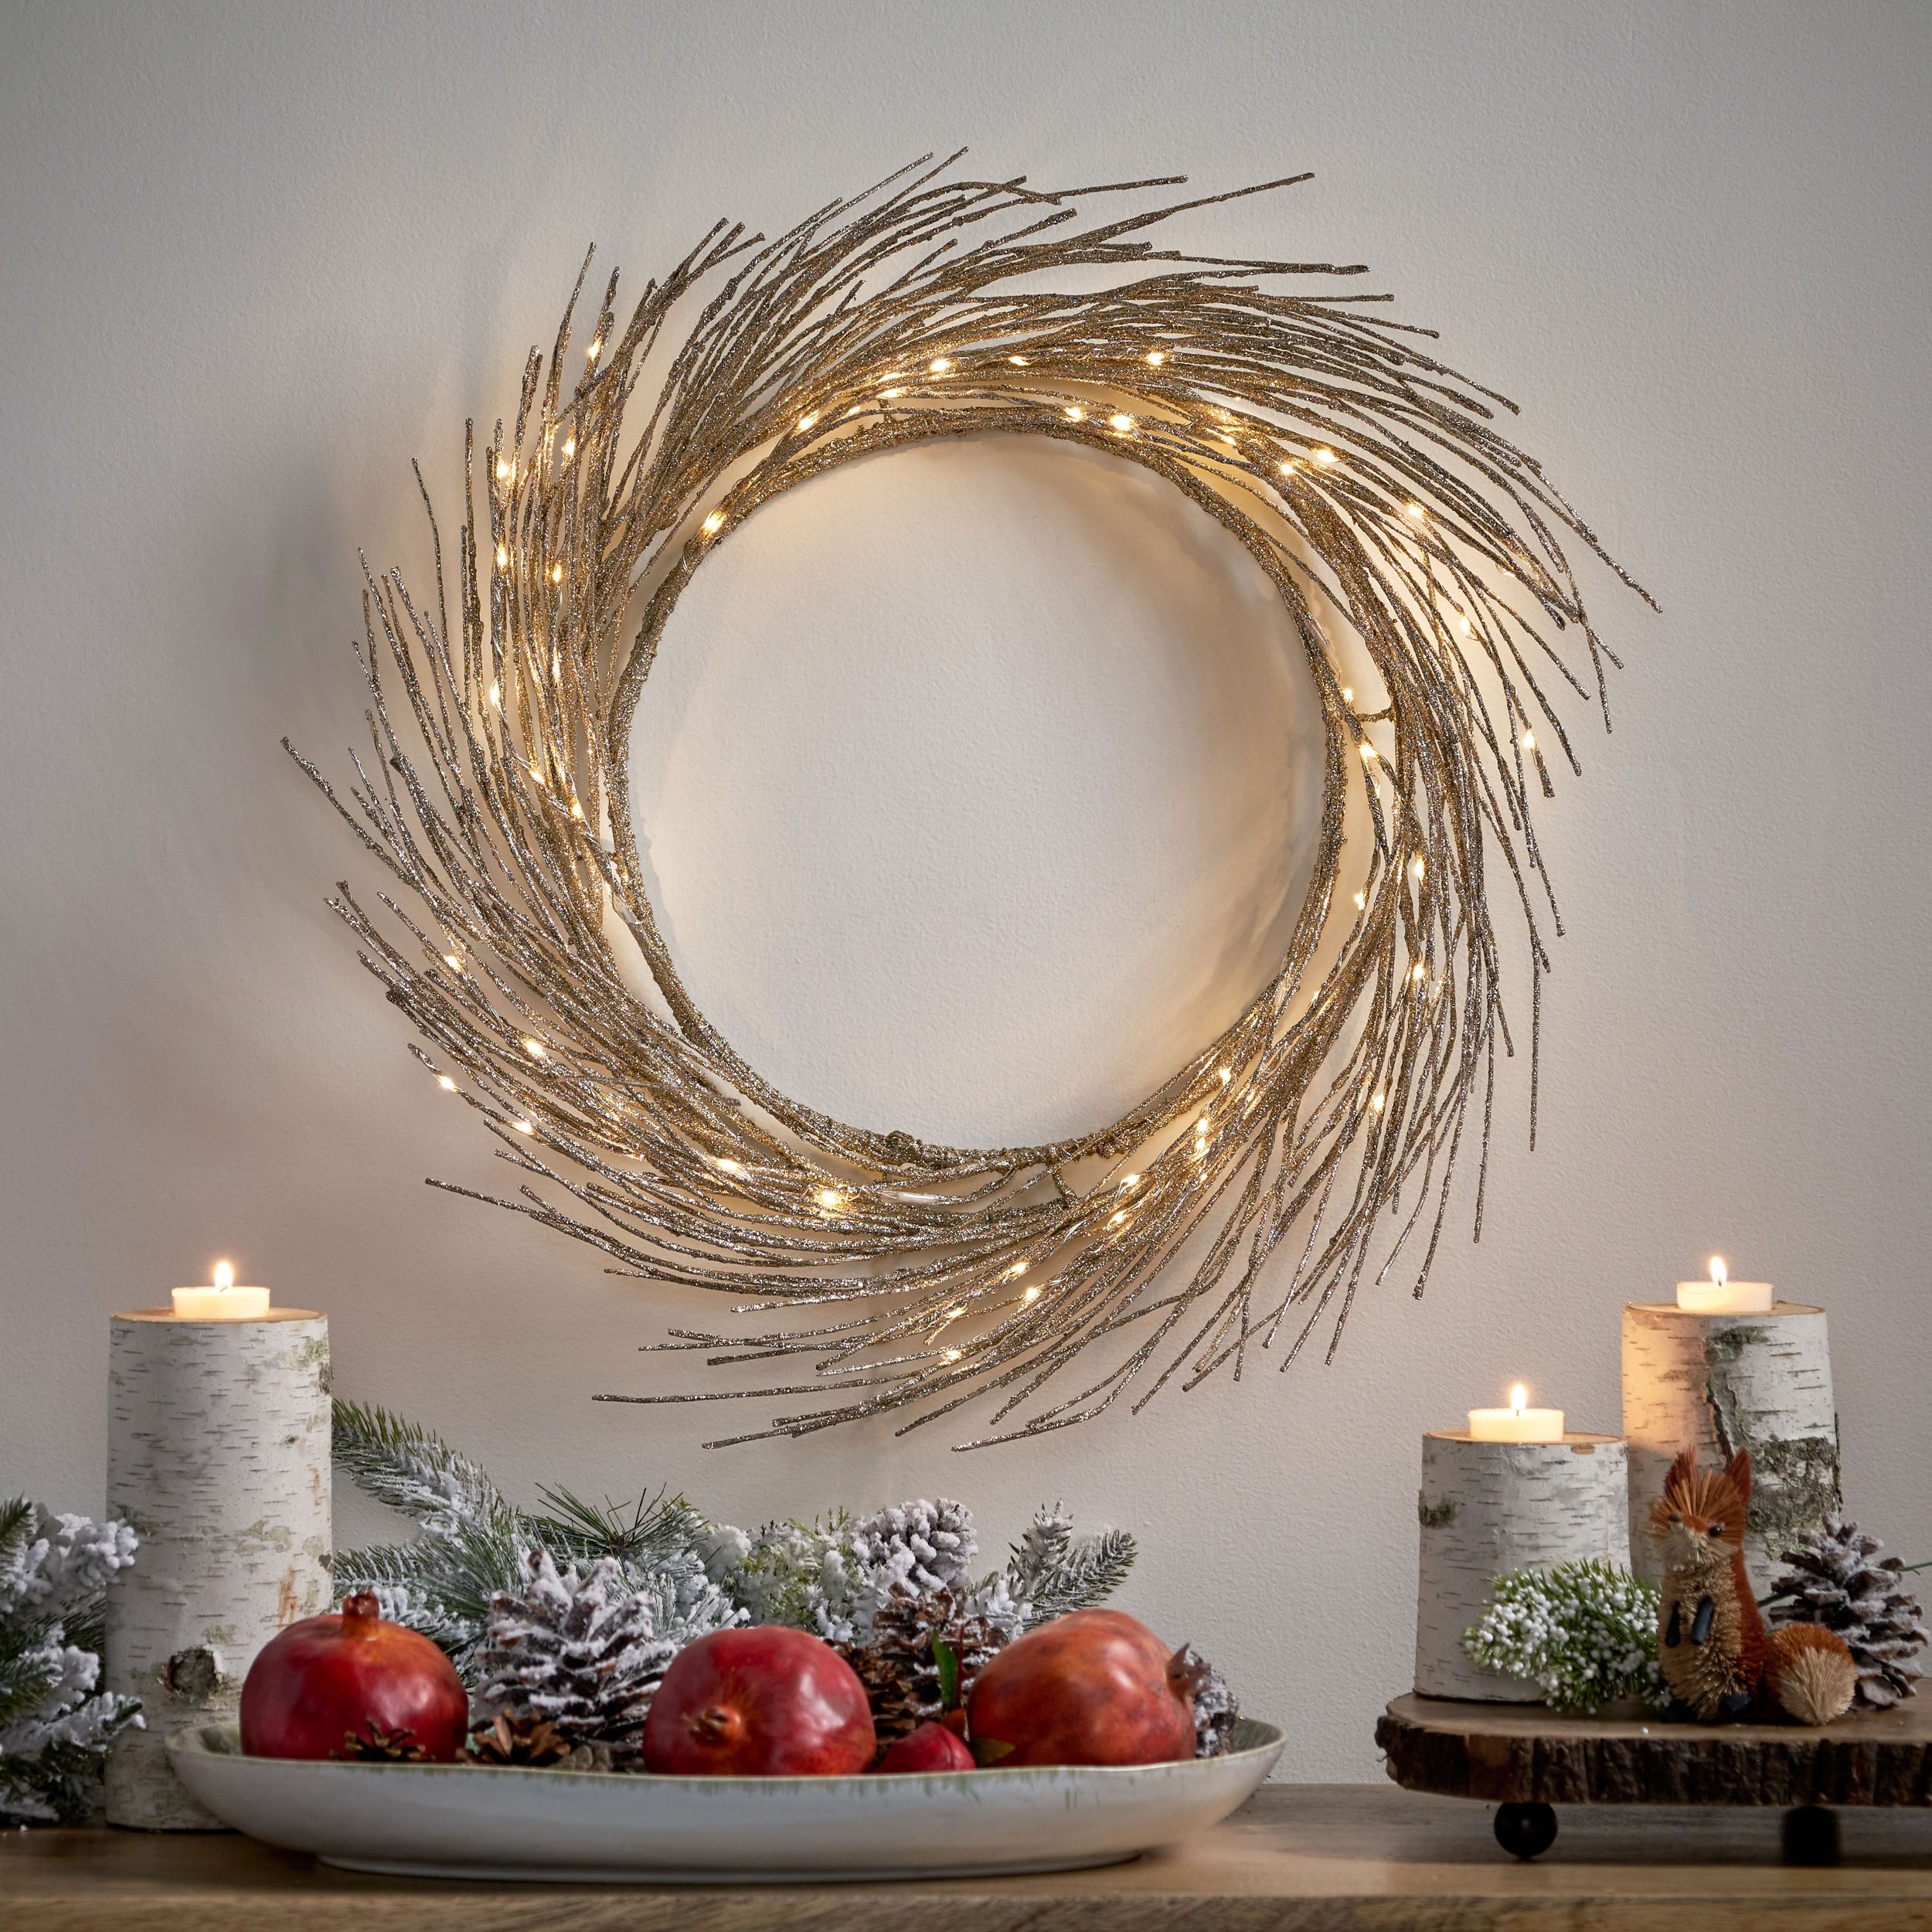 https://ak1.ostkcdn.com/images/products/is/images/direct/84303e3d77f903ad617c3b208deceb59bbcca246/Triple-24%22-Pre-lit-Warm-White-LED-Wreath-by-Christopher-Knight-Home.jpg